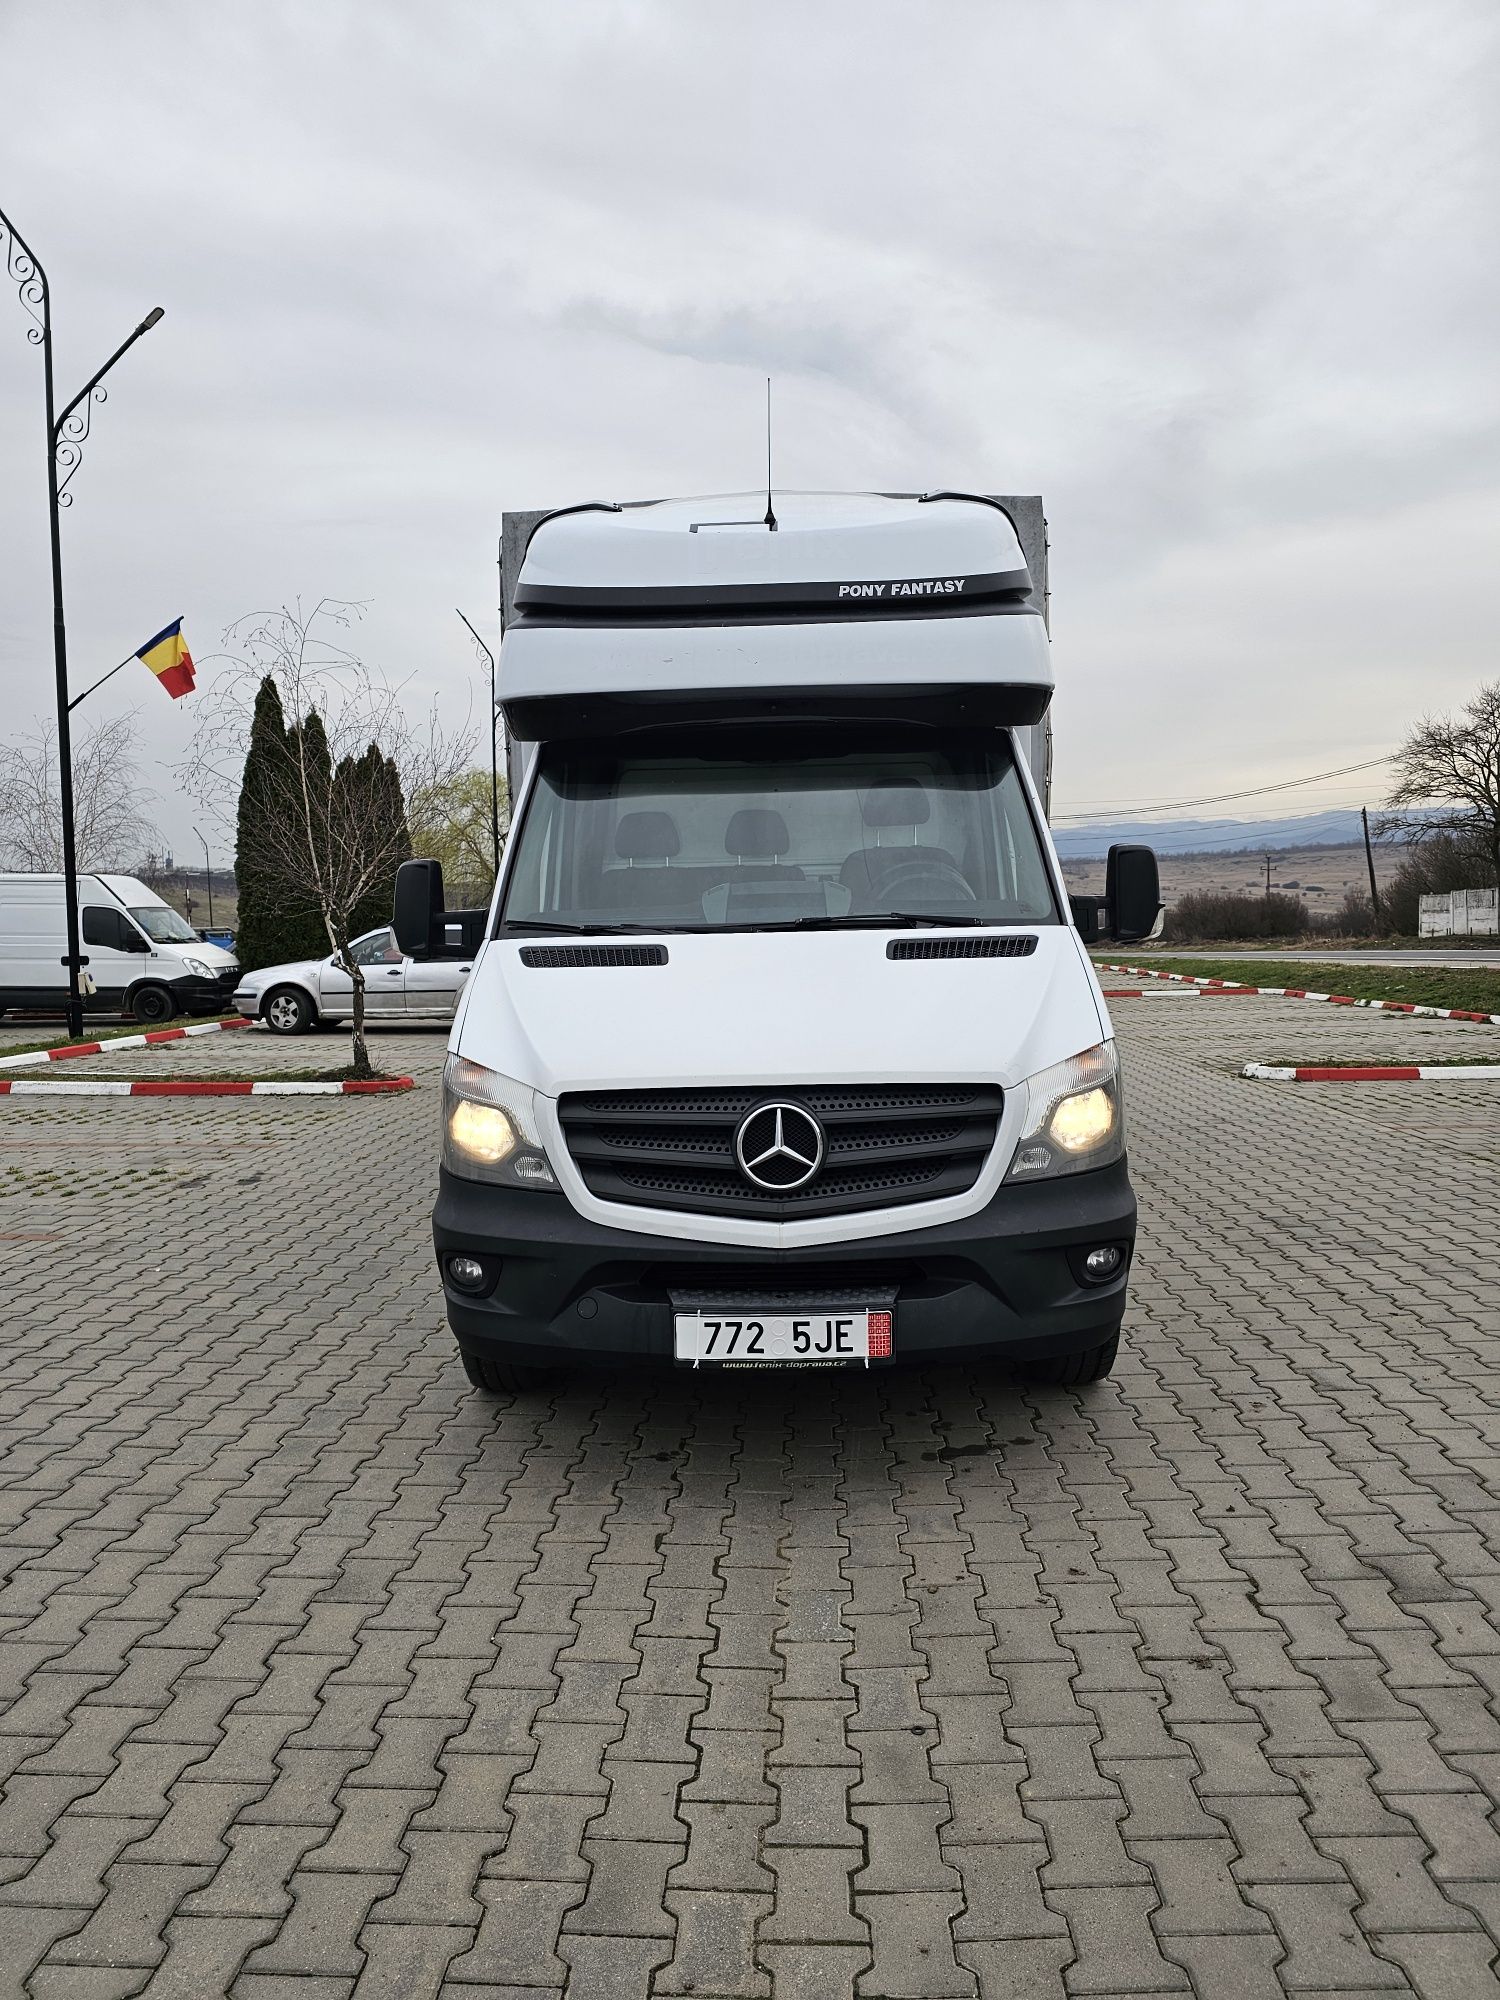 Mercedes sprinter,[2018]316, Renault master, Fiat ducato  iveco daily